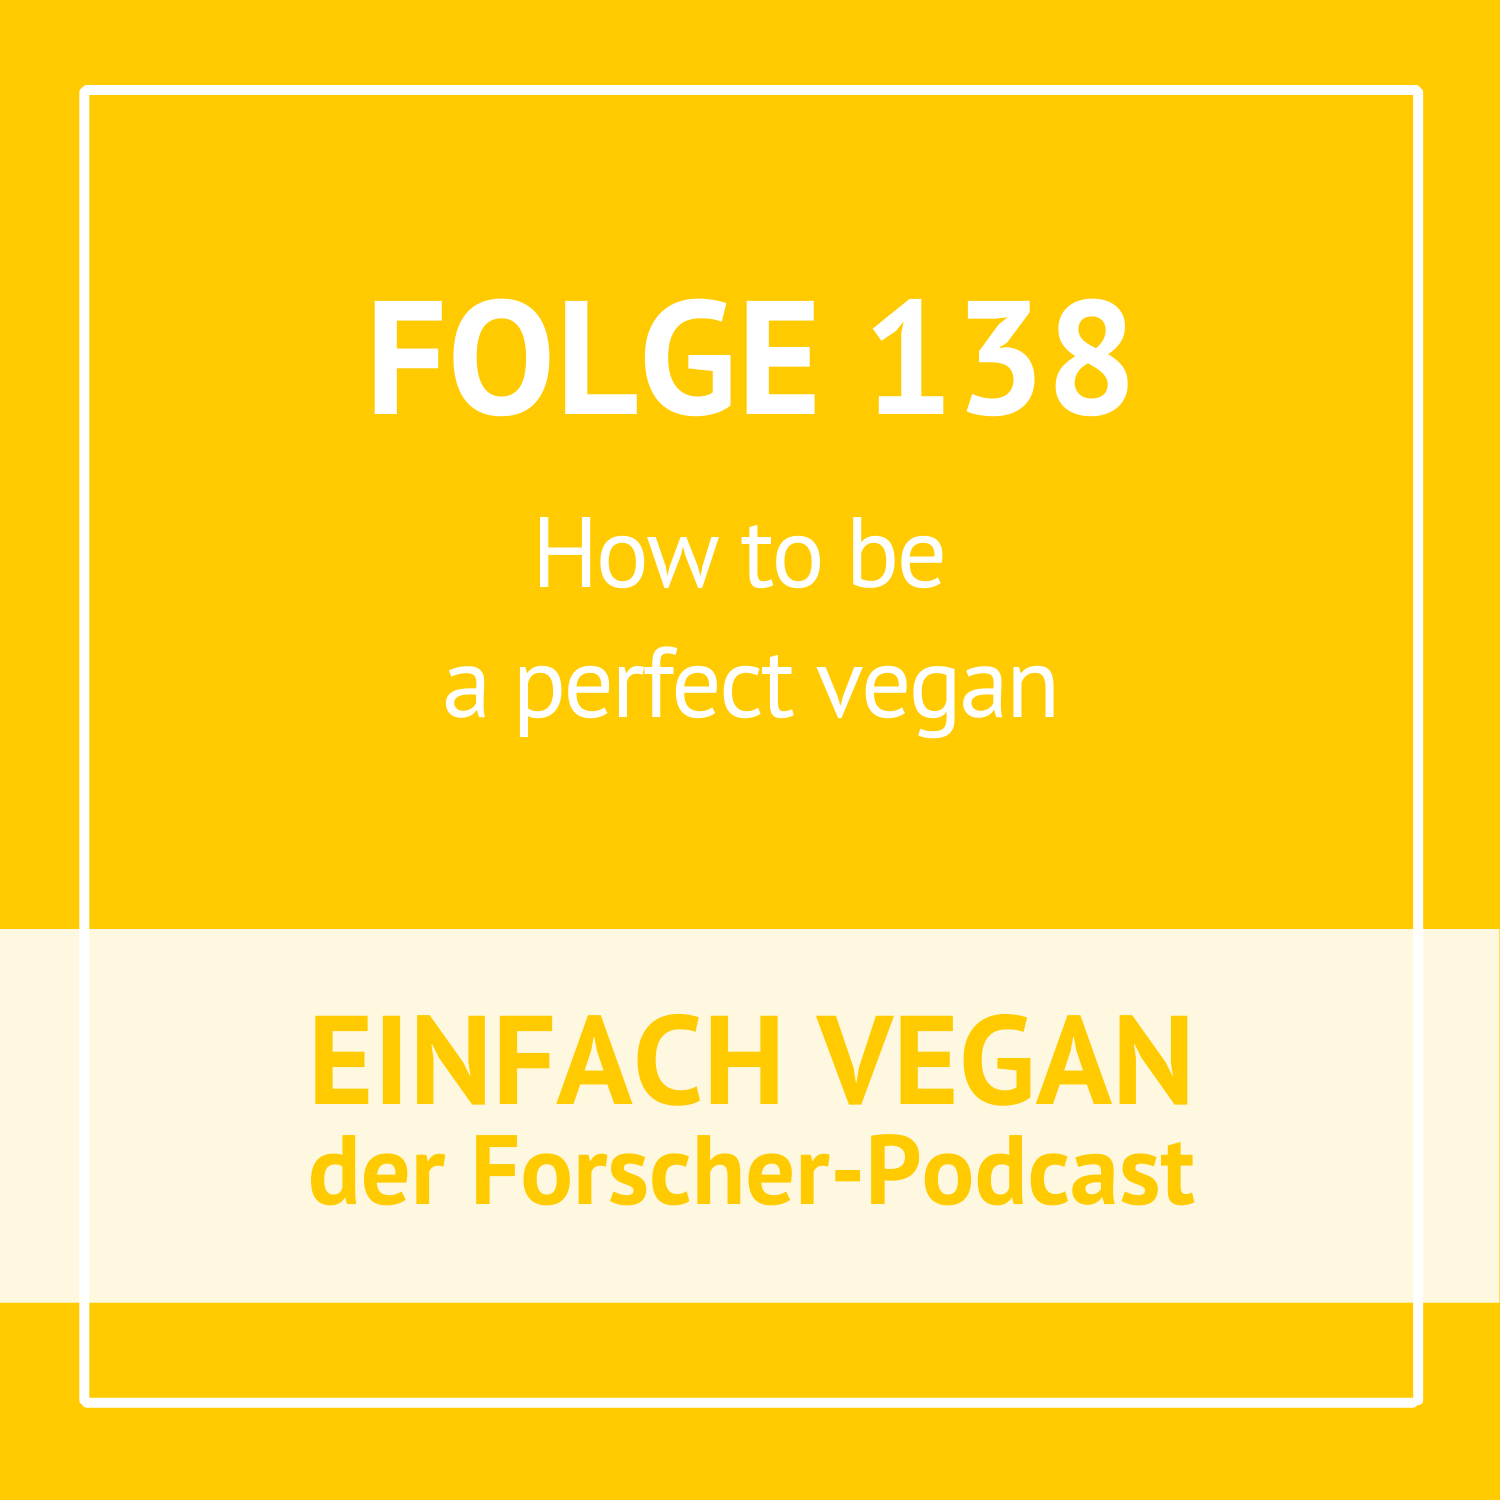 Folge 138 - How to be a perfect vegan